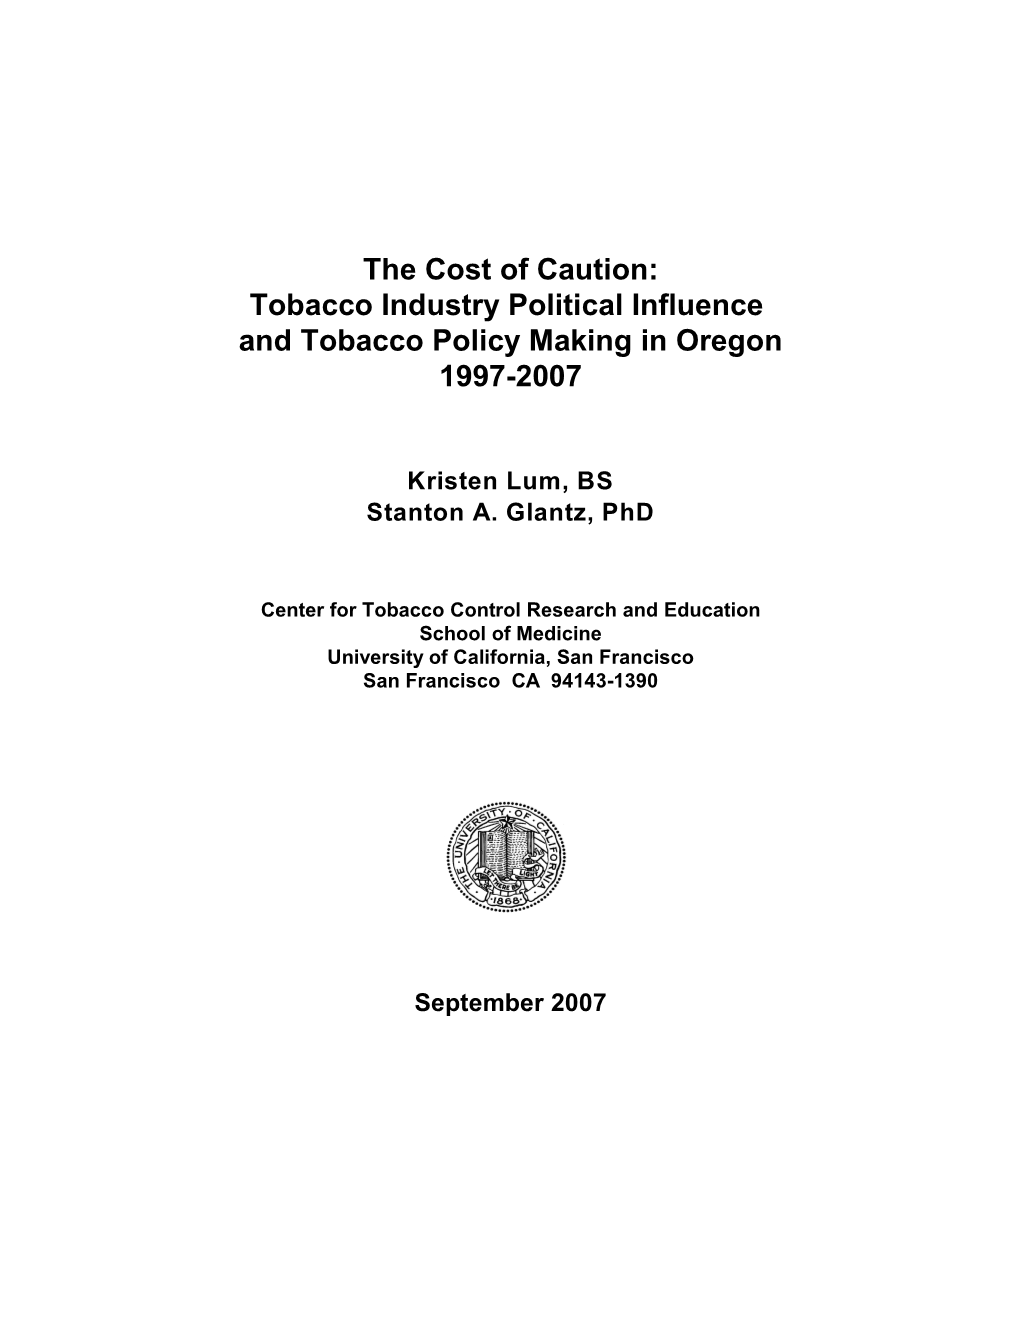 The Cost of Caution: Tobacco Industry Political Influence and Tobacco Policy Making in Oregon 1997-2007